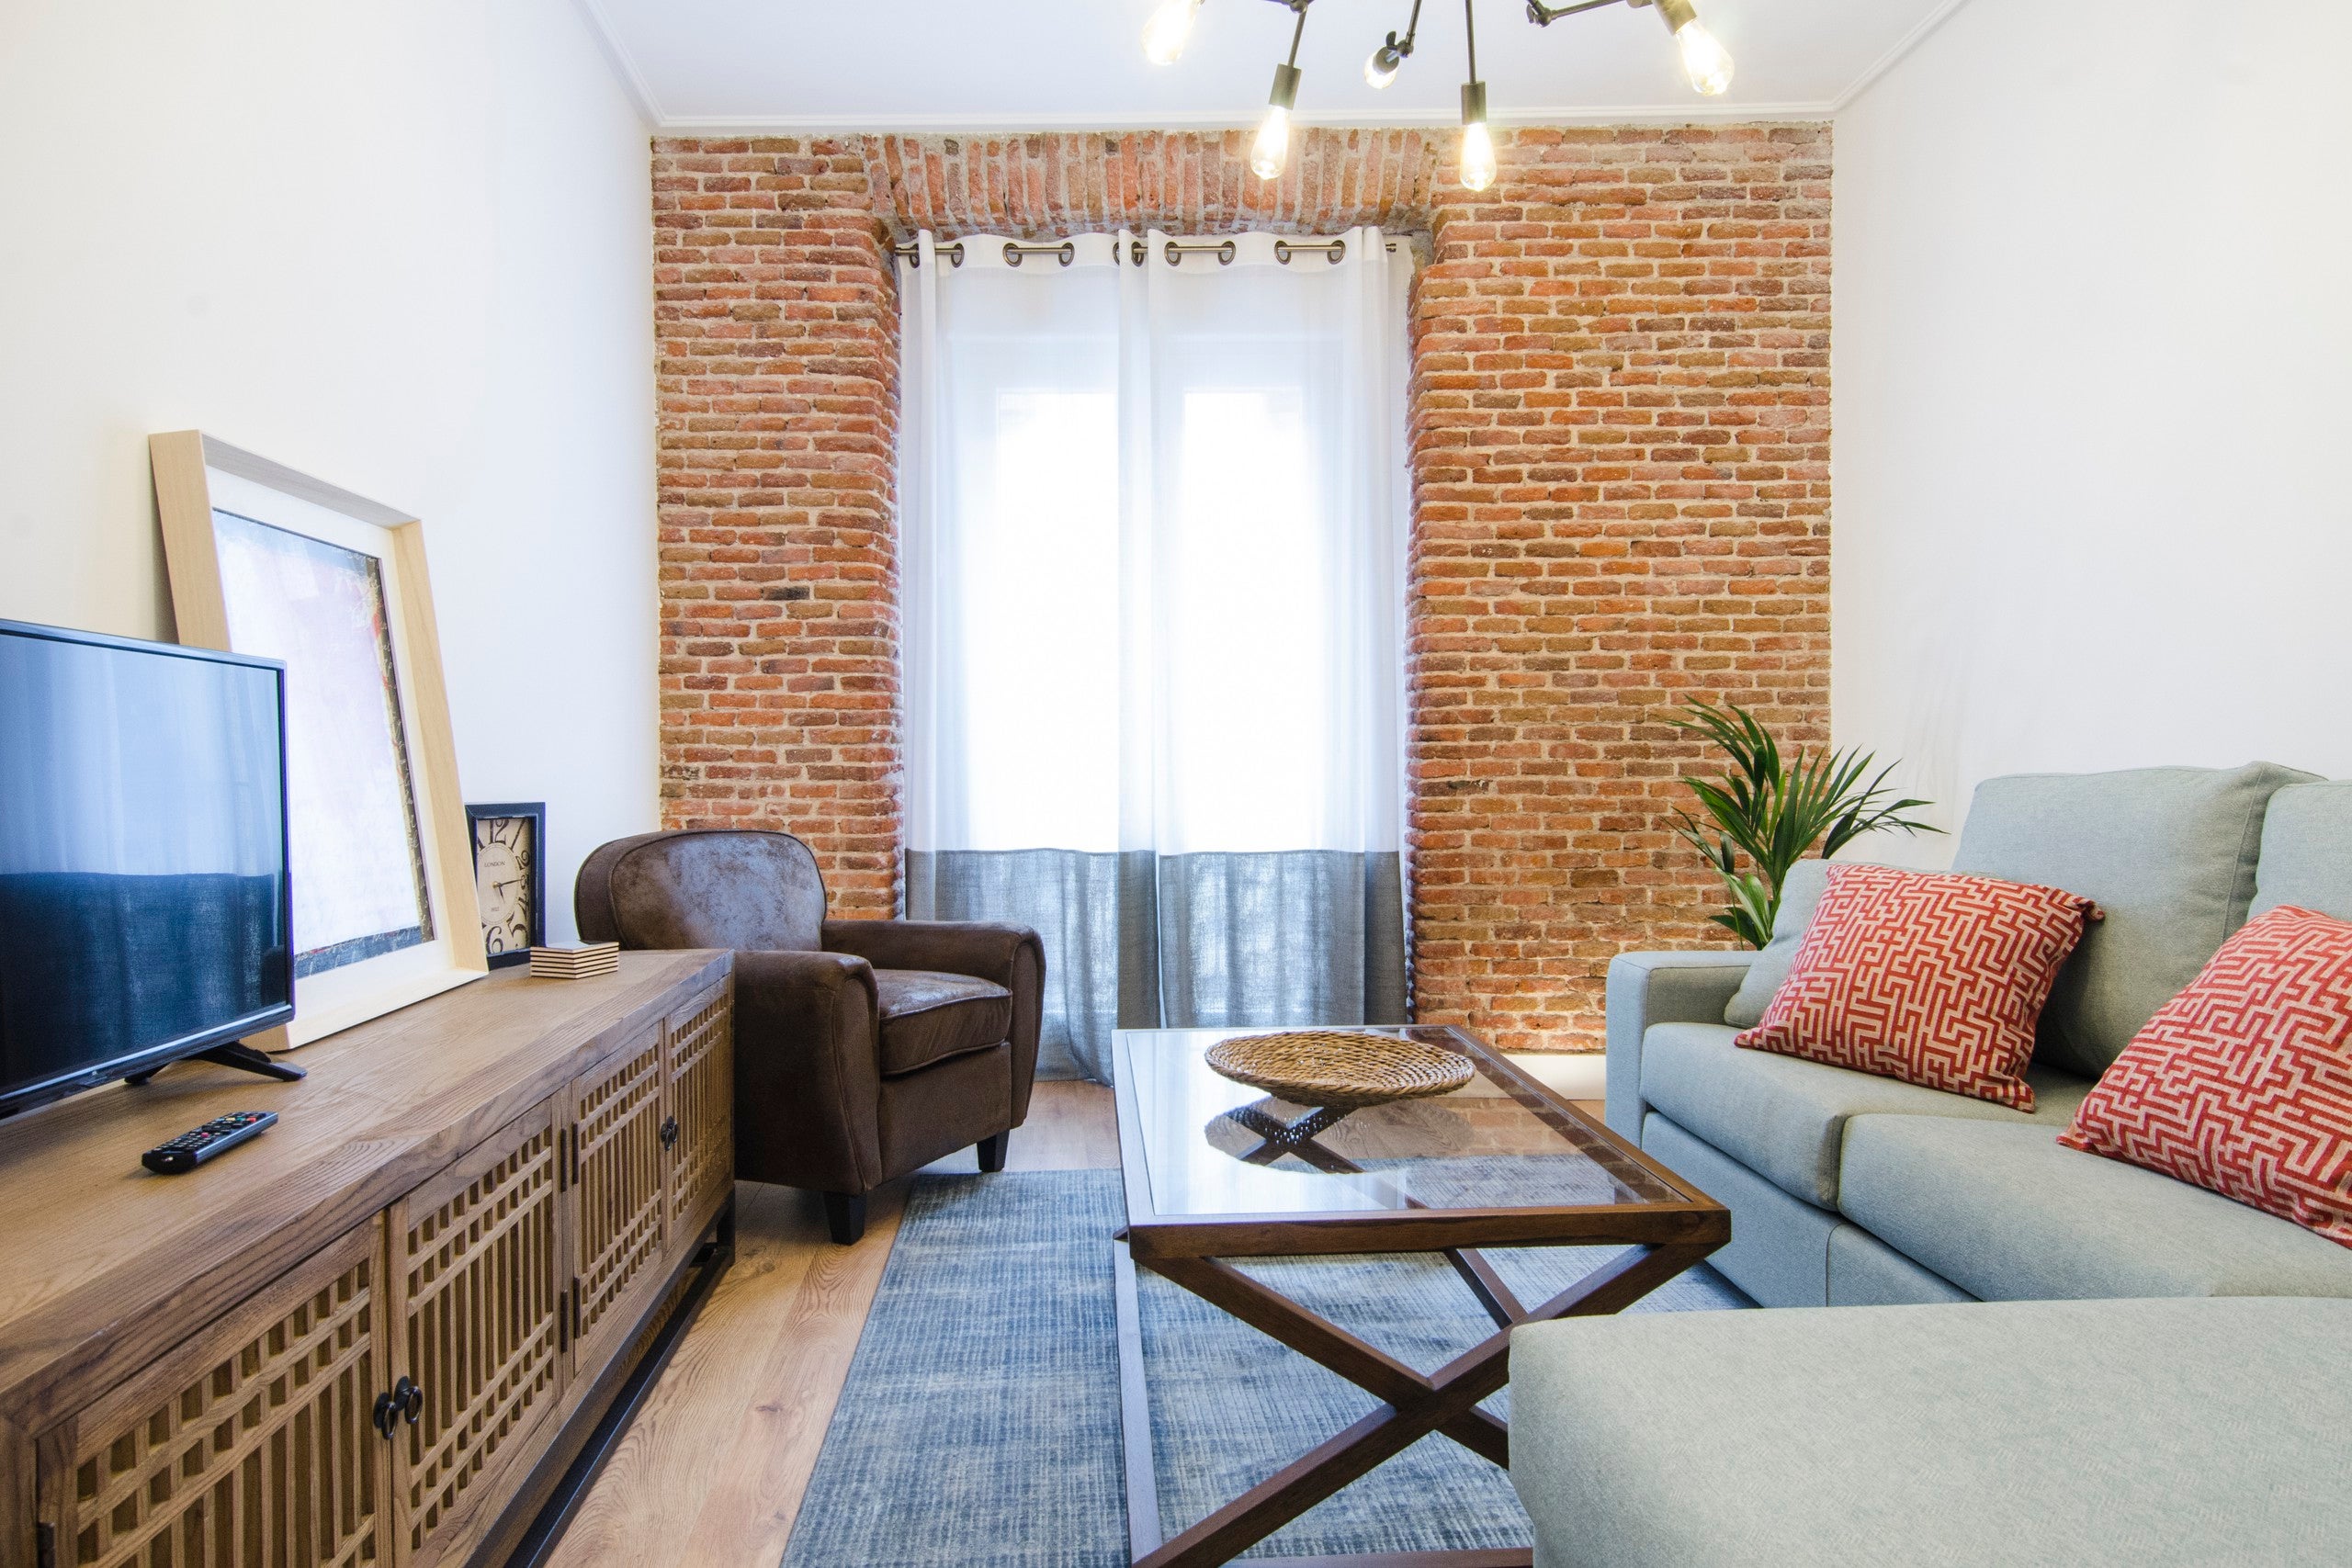 Property Image 2 - 2 bedrooms 2 bathrooms furnished - Chueca - cozy & functional - MintyStay